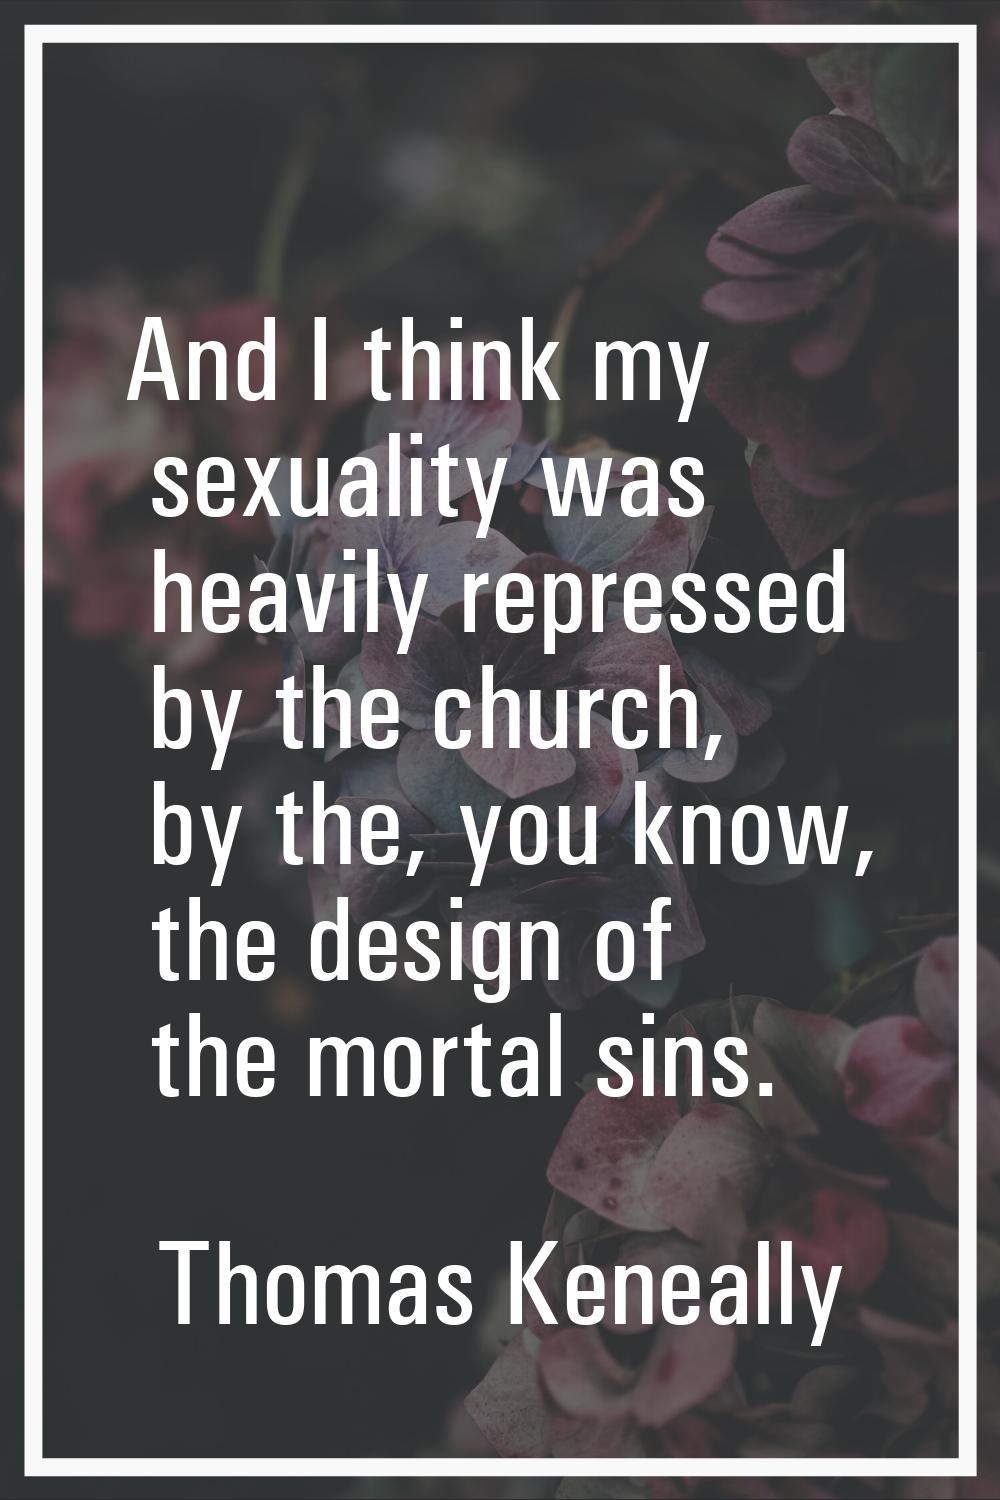 And I think my sexuality was heavily repressed by the church, by the, you know, the design of the m